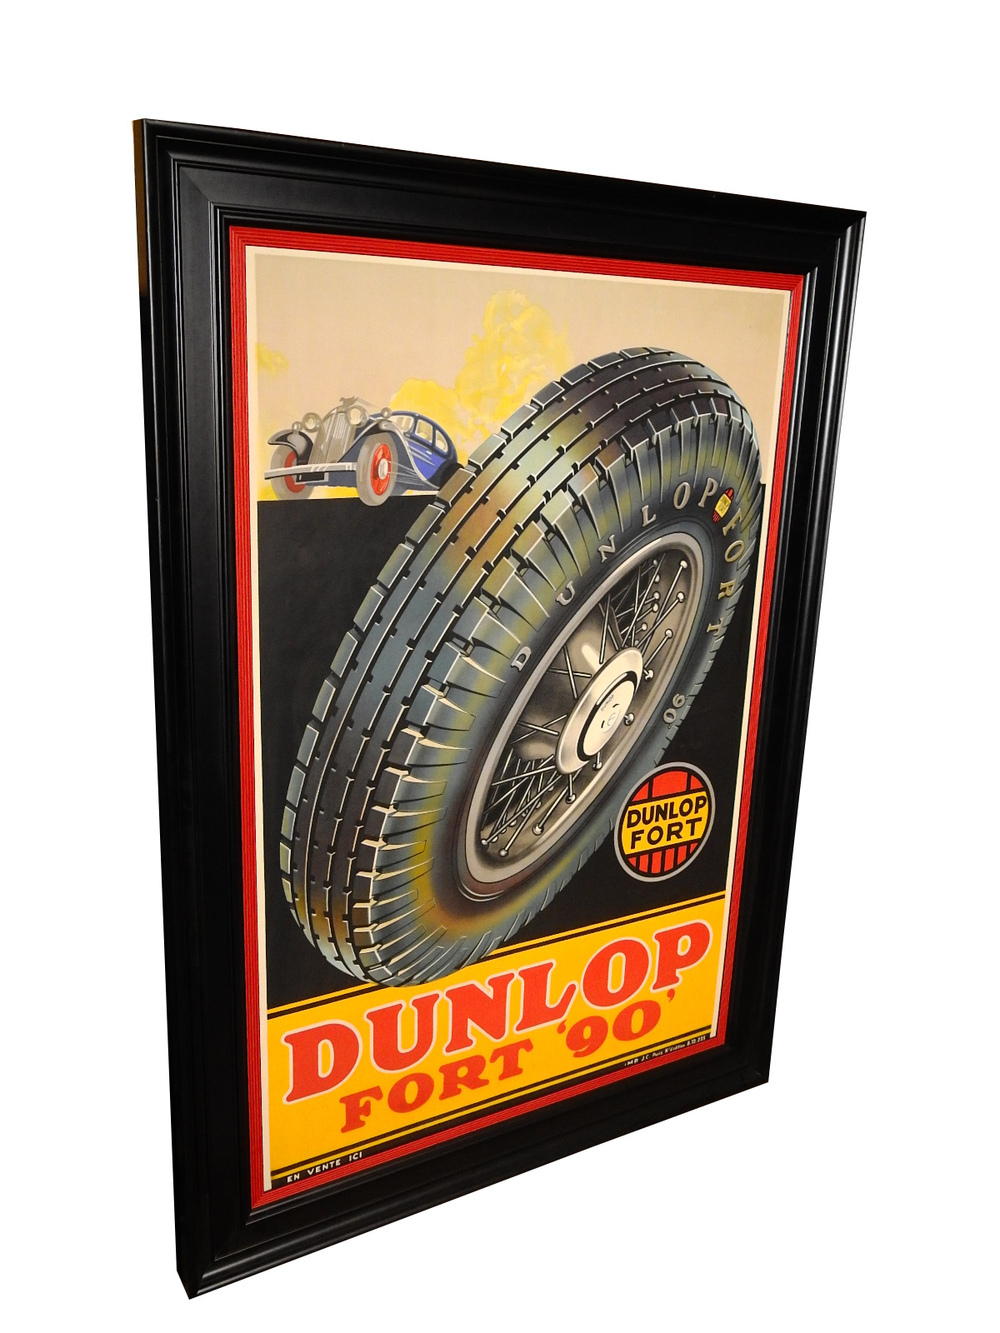 20x30 Dunlop Tires Vintage Style 1930 Auto Advertising Poster